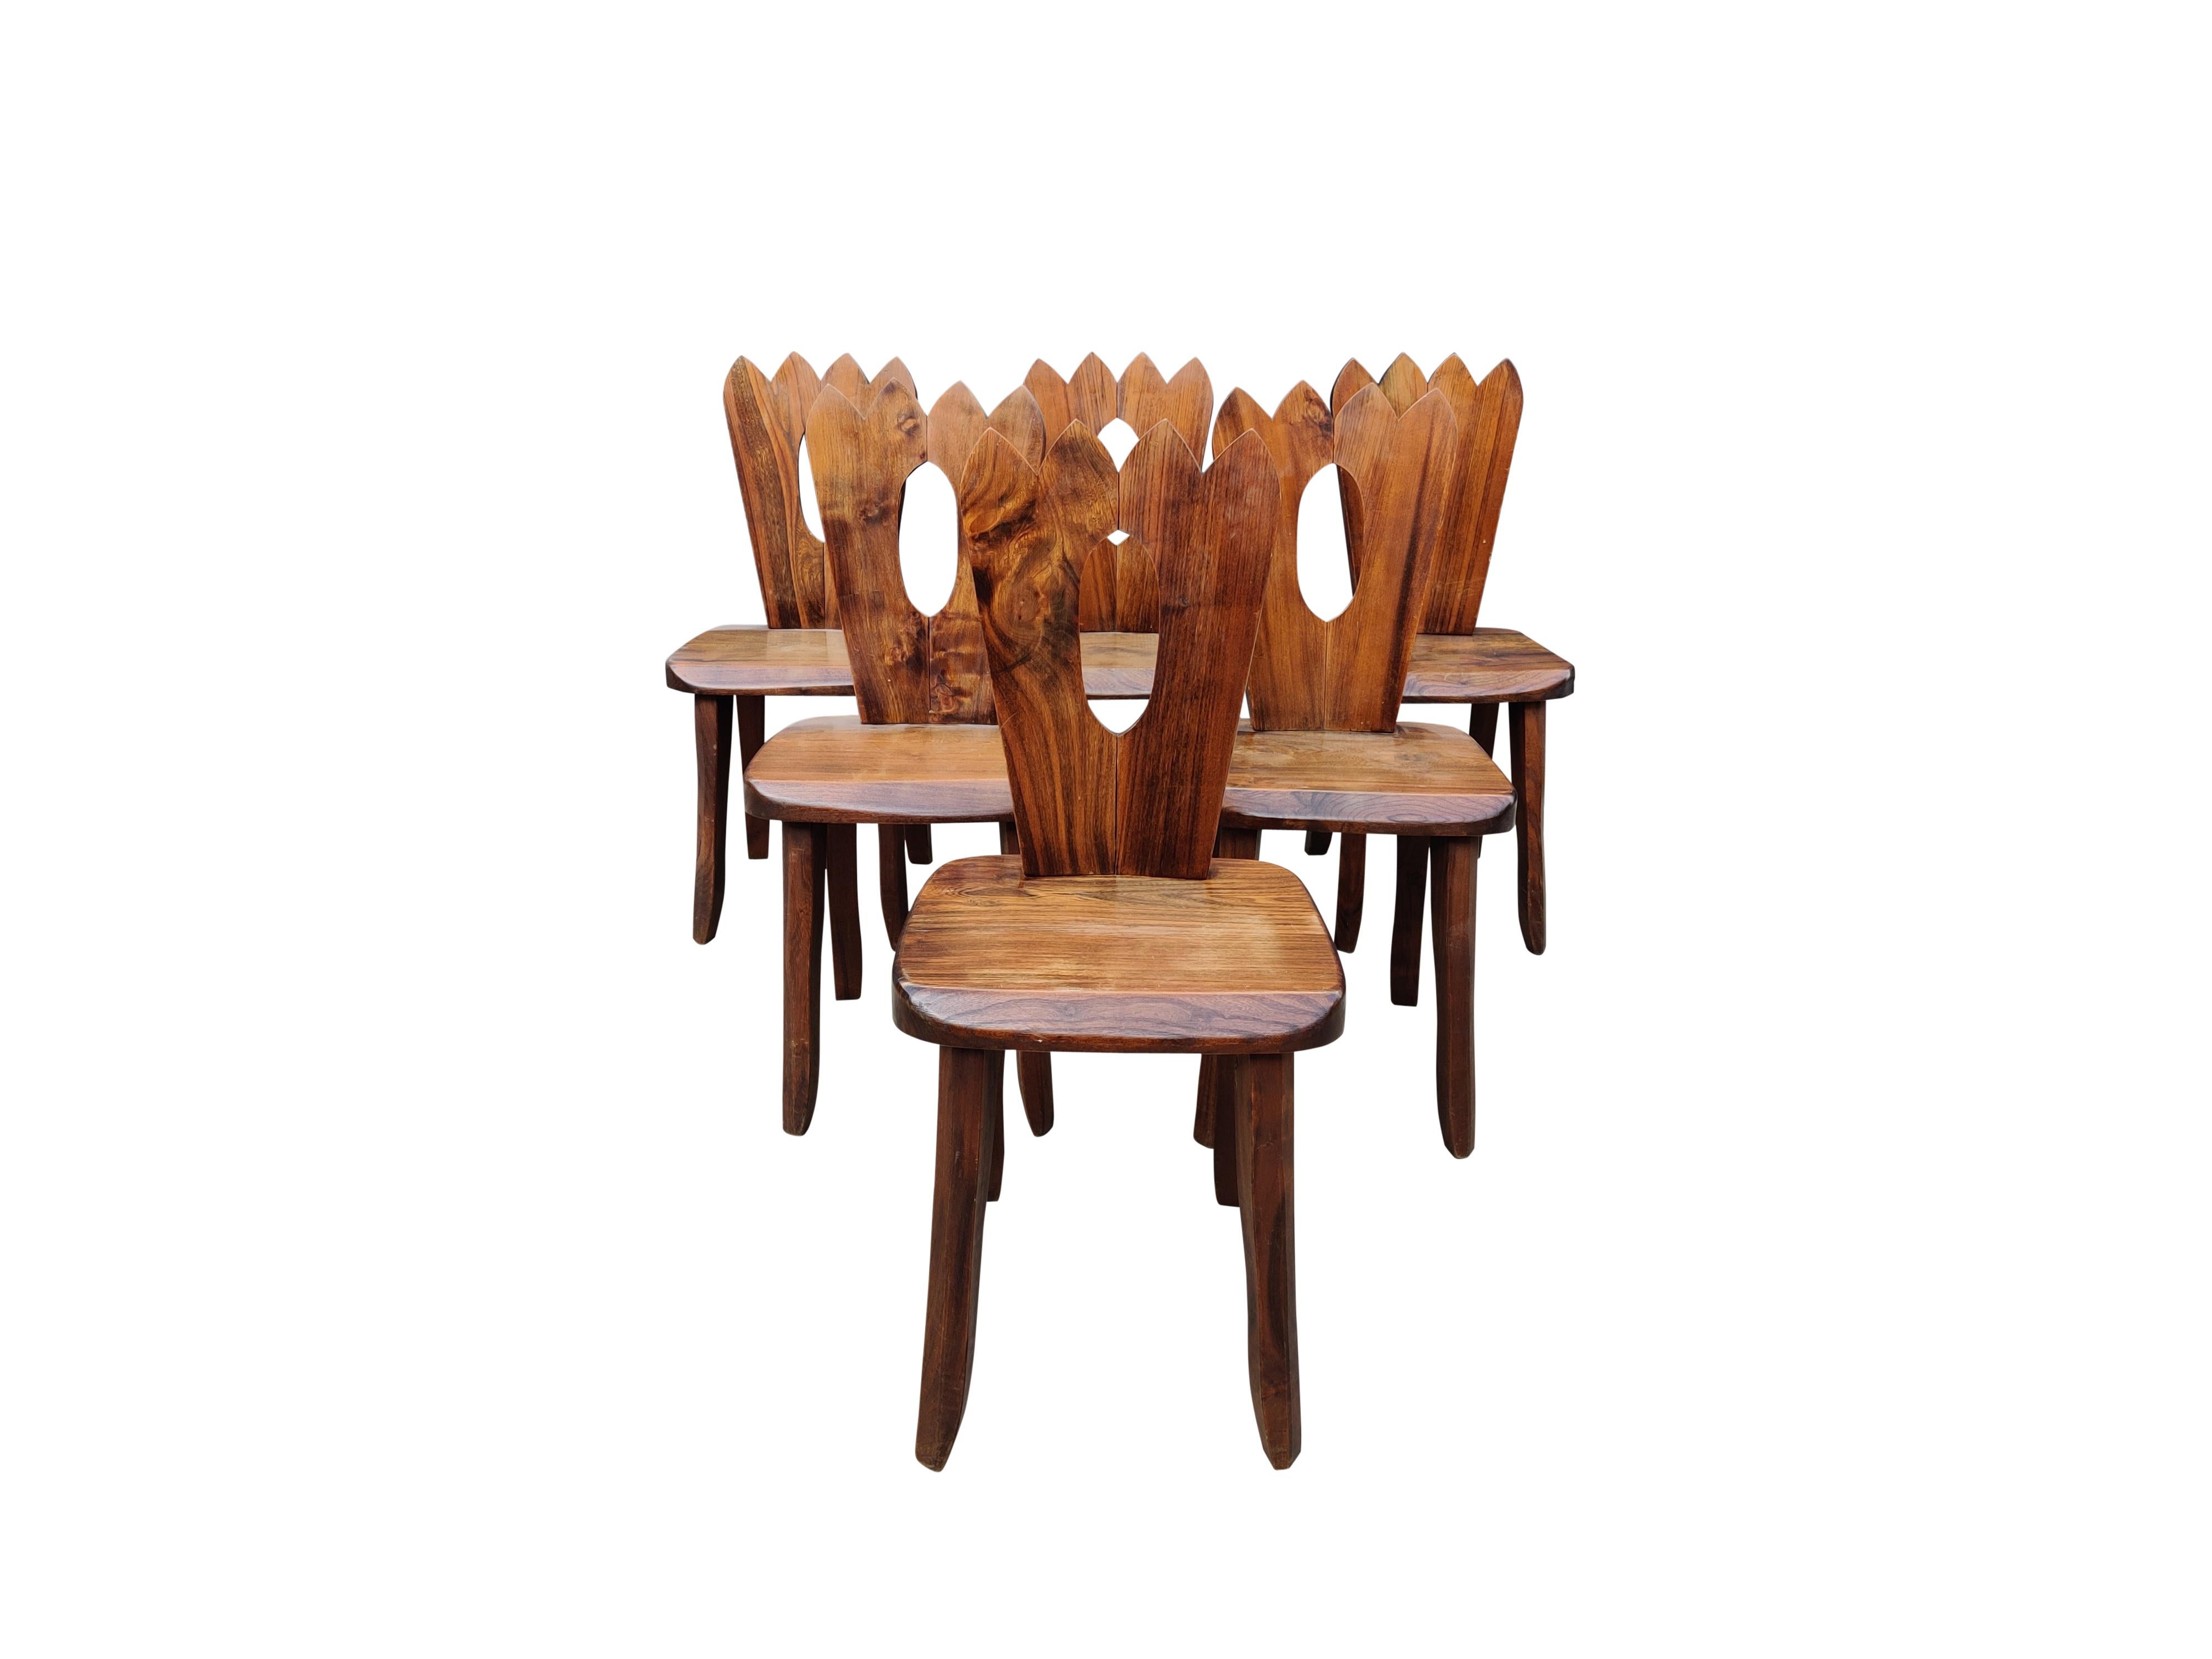 Very elegant set of elm wooden chairs by Olavi Hänninen.

The crown shaped backrests are unique.

These are great chairs to create a warm and cosy interior for the cold winter months.

Very good, original condition.

1950s,